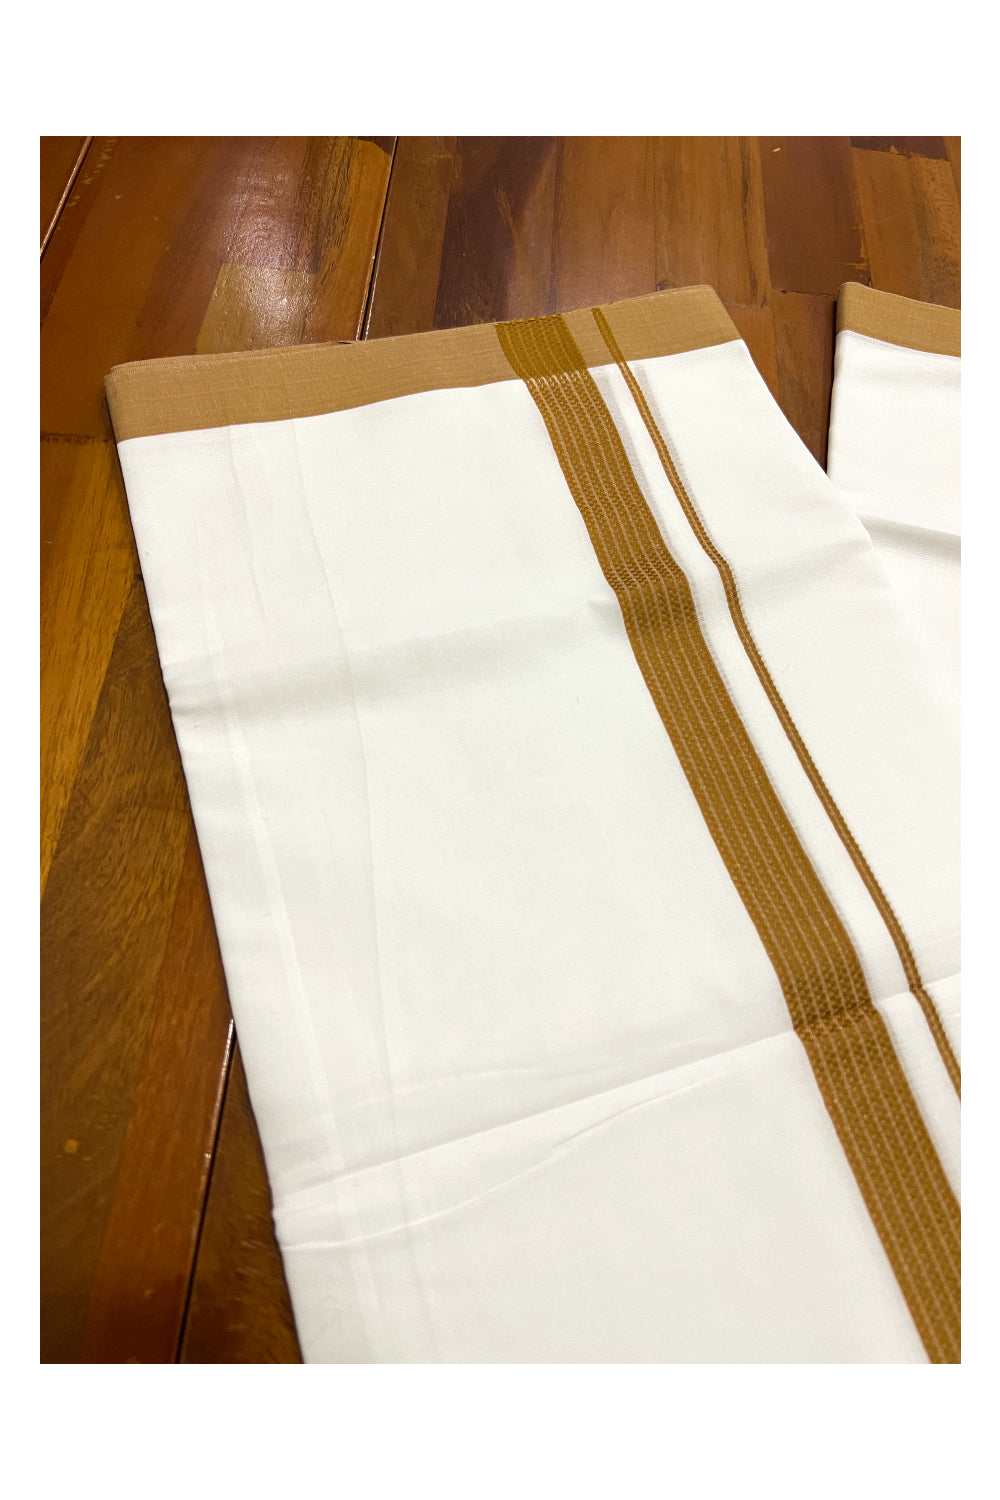 Pure White Cotton Double Mundu with Lines on Brownish Yellow Border (South Indian Dhoti)